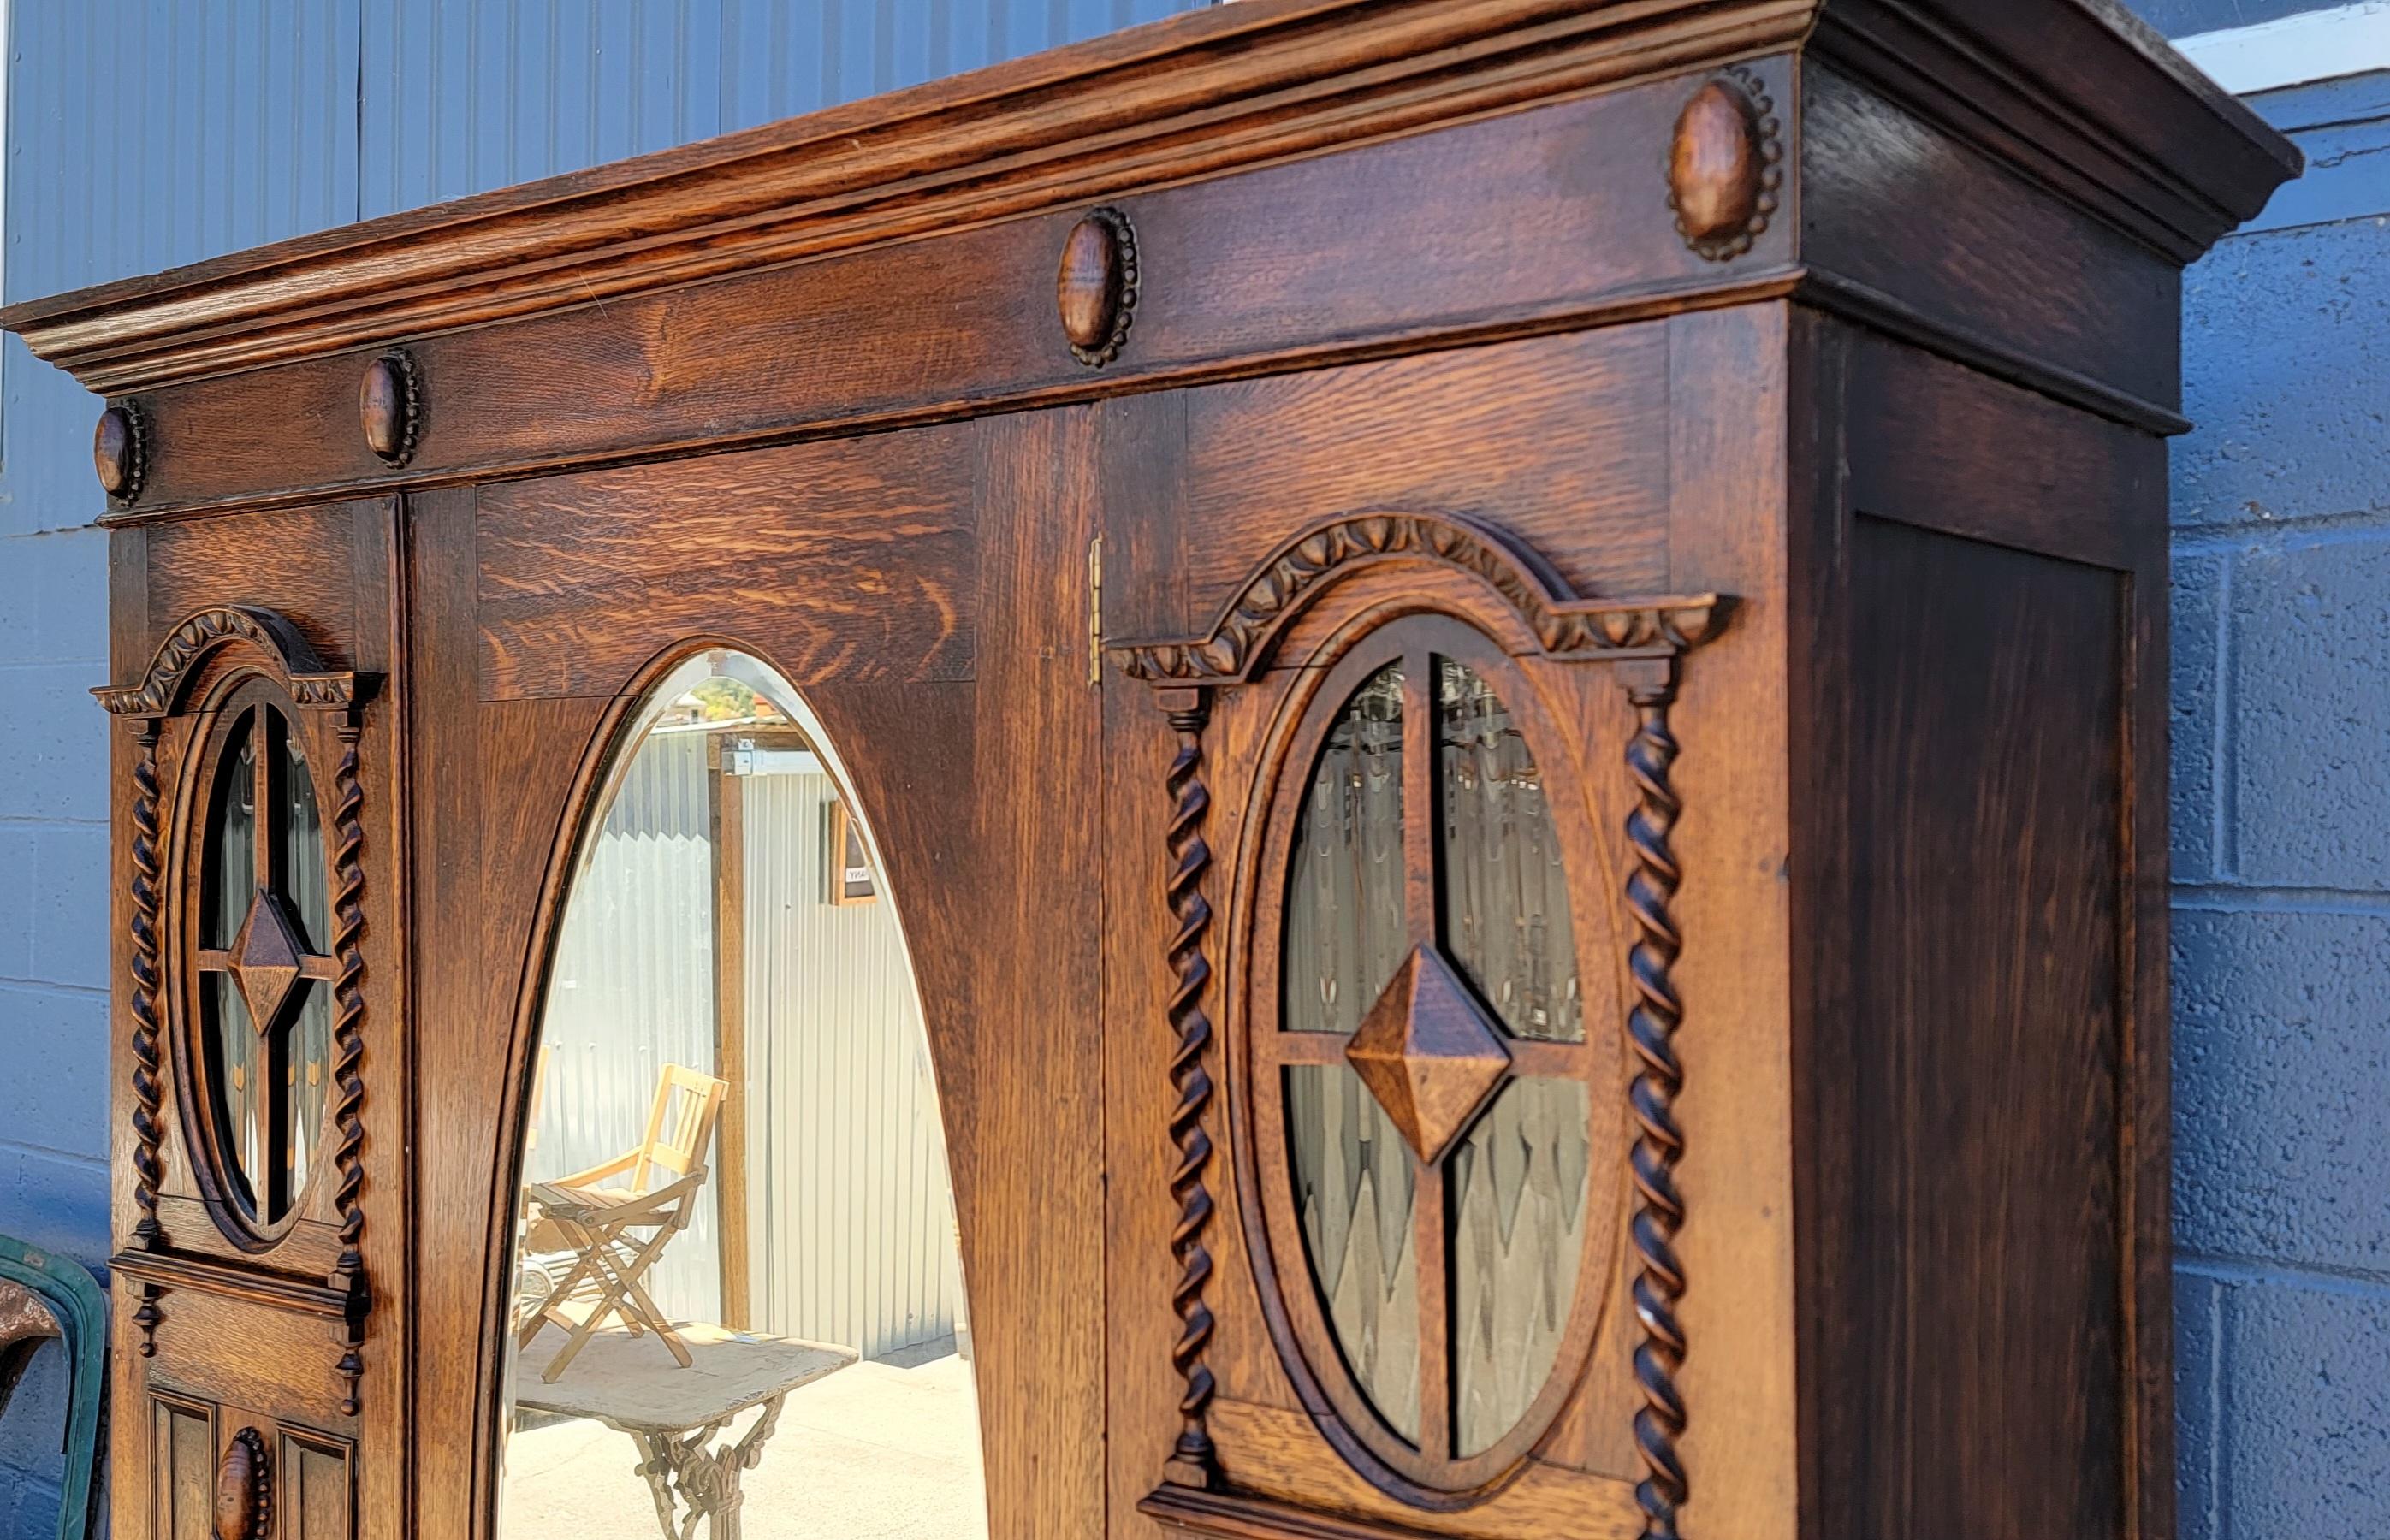 Fine example of a 1930's English tiger oak Jacobean style wardrobe. Exceptional glow to original finish. Original hardware working as in tended. Original oval beveled mirror and ribbed oval glass panels. Original interior brass hanging rod and